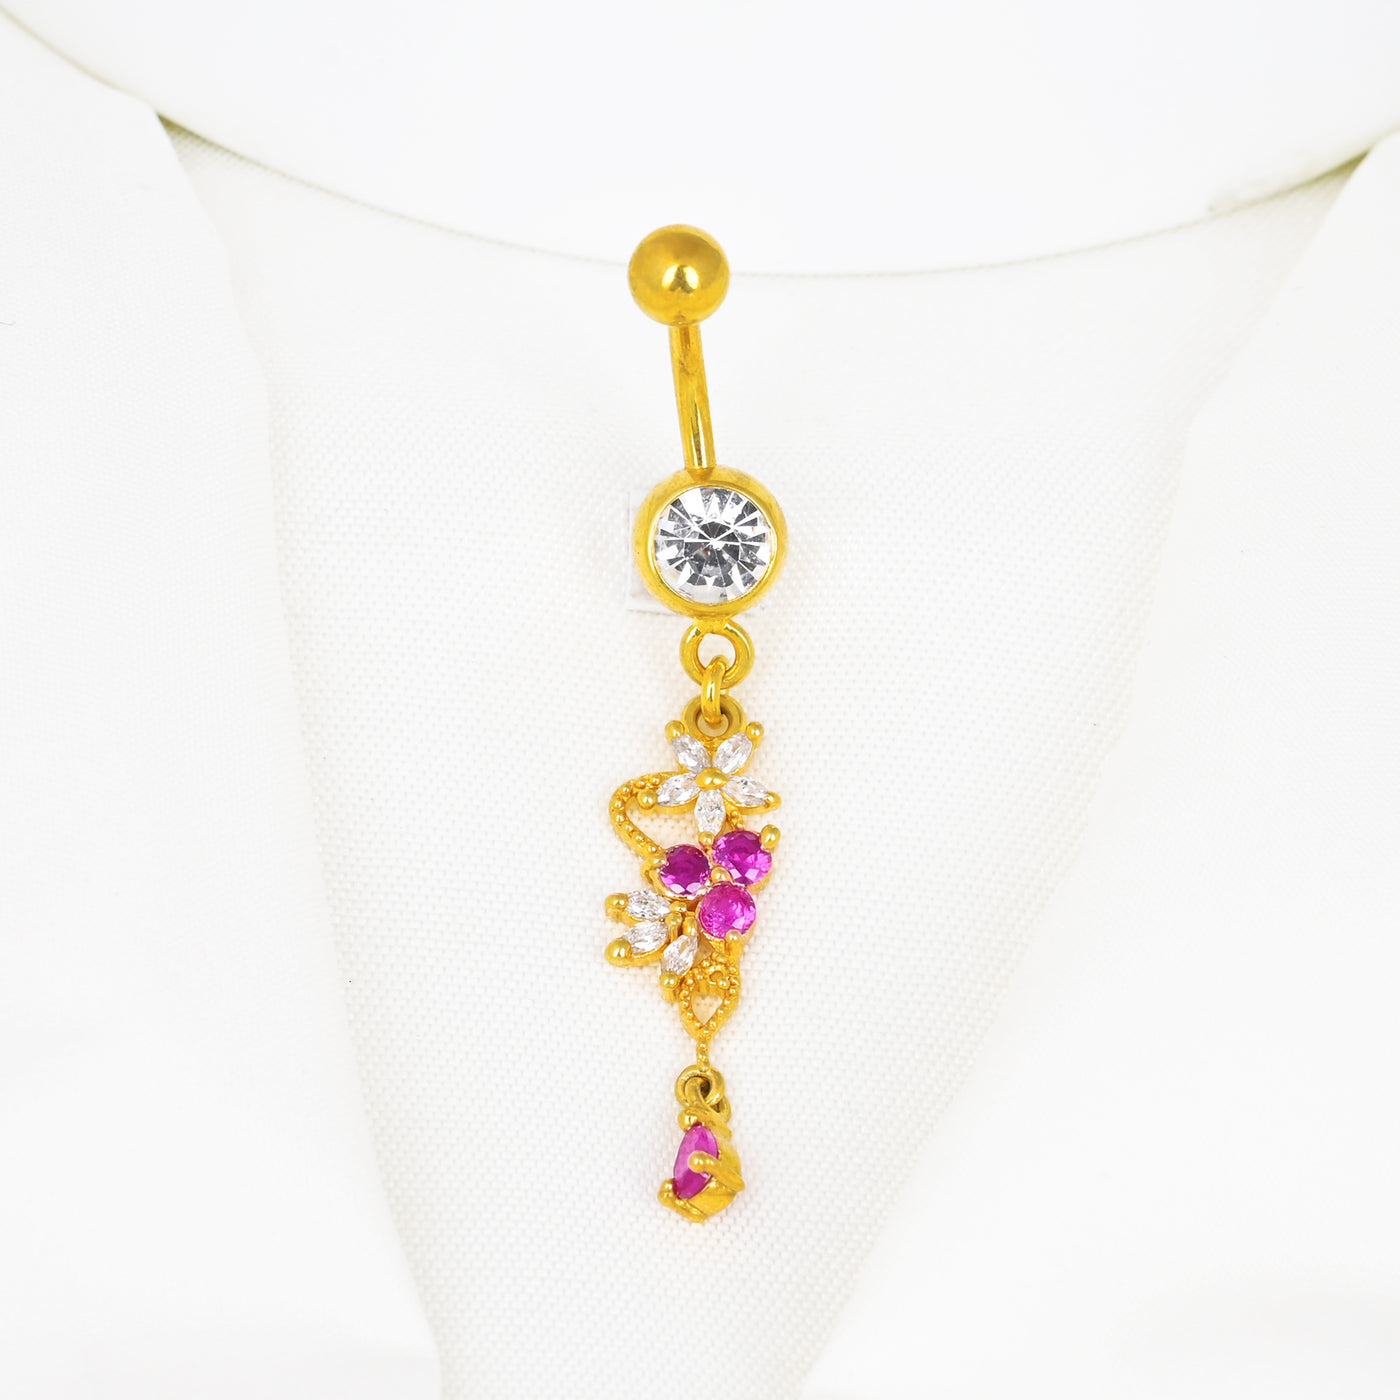 Flower Bail Dangling Belly Button Ring